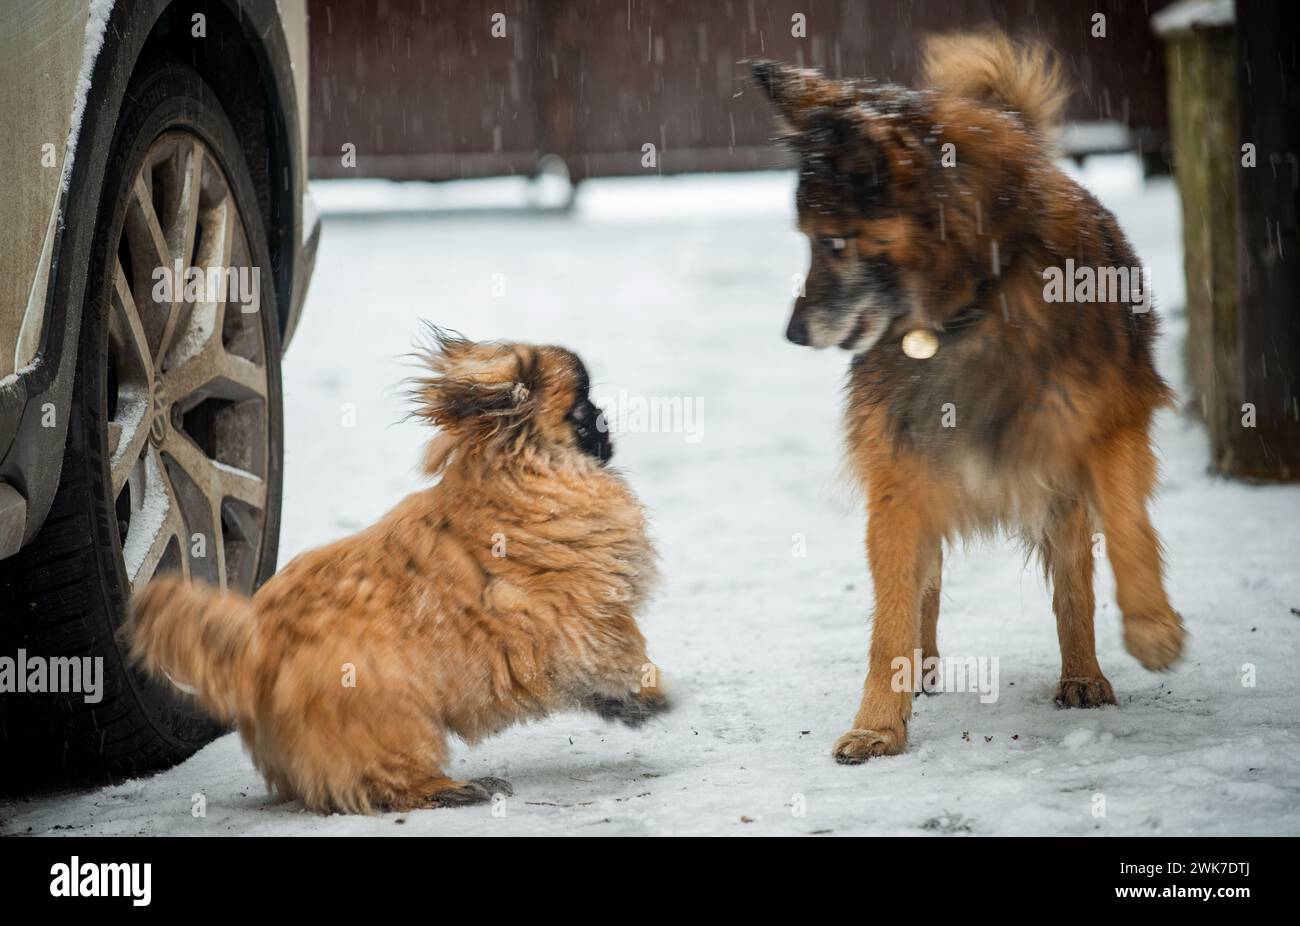 A Pekignese dog  and a brown fluffy dog playing in the snowfall Stock Photo